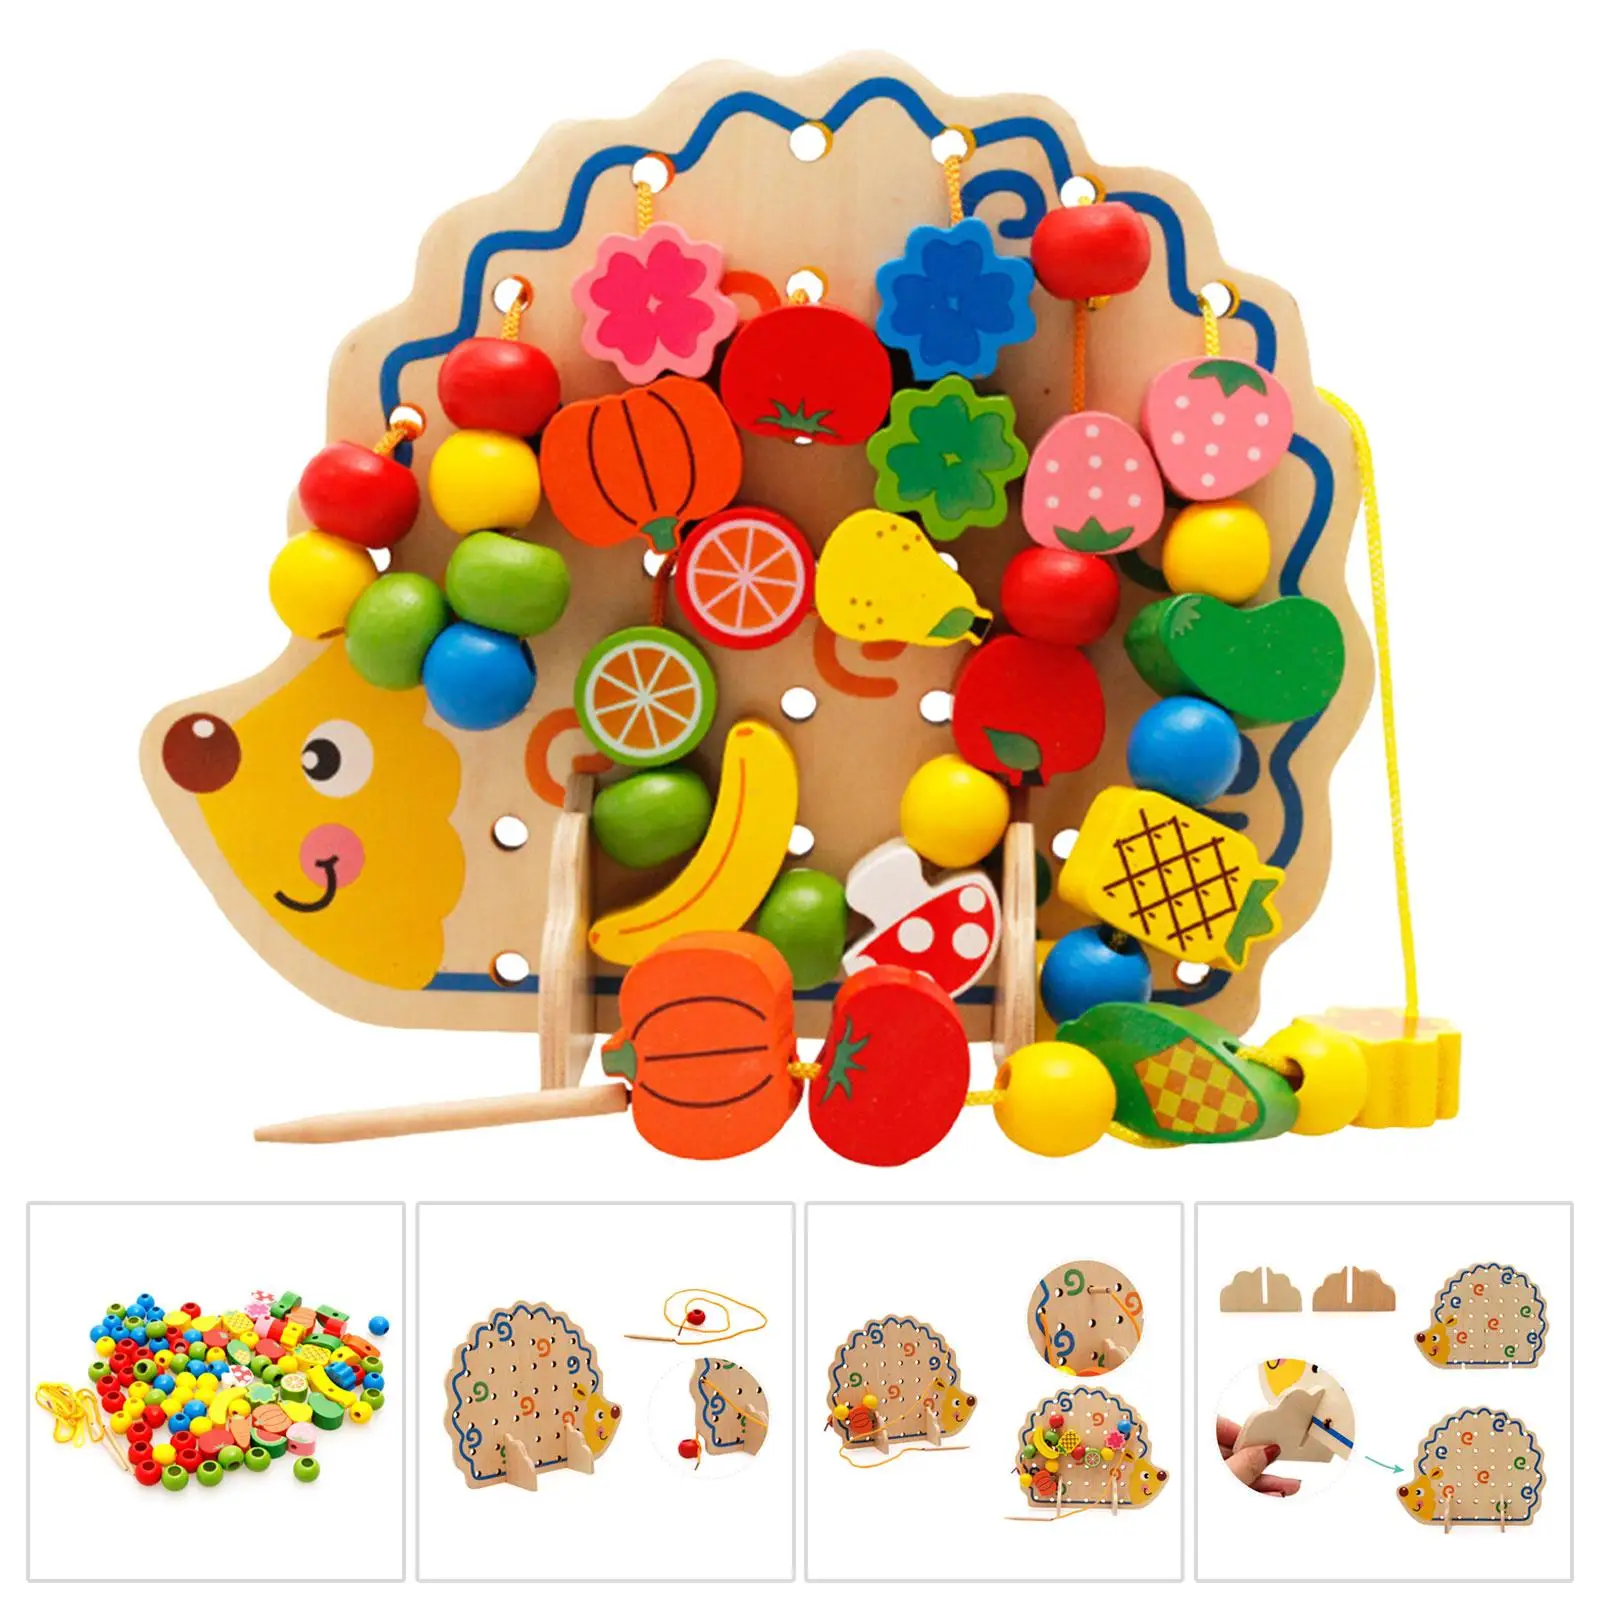 

Lacing Threading Toys Educational Learning Activity Toy Wooden Stringing Beads for Preschool Children 2 3 4 Age Kids Best Gifts